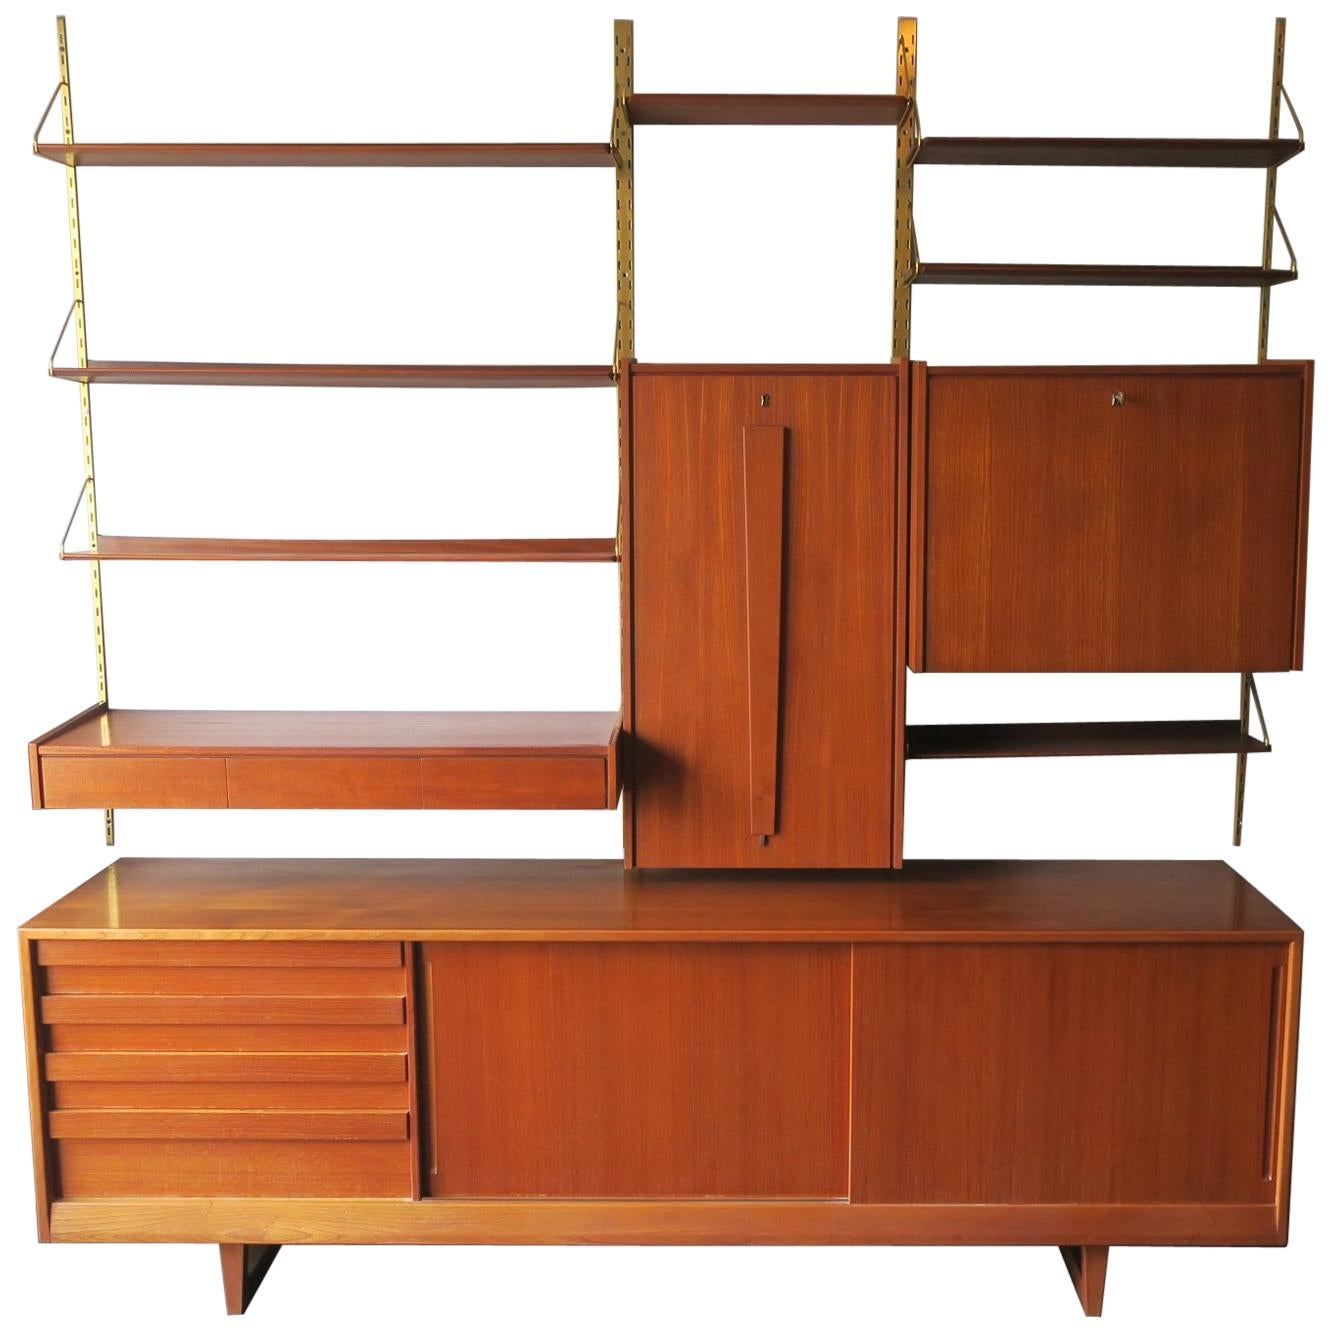 Midcentury Teak Modular Shelf System with Low Sideboard, 1960s For Sale